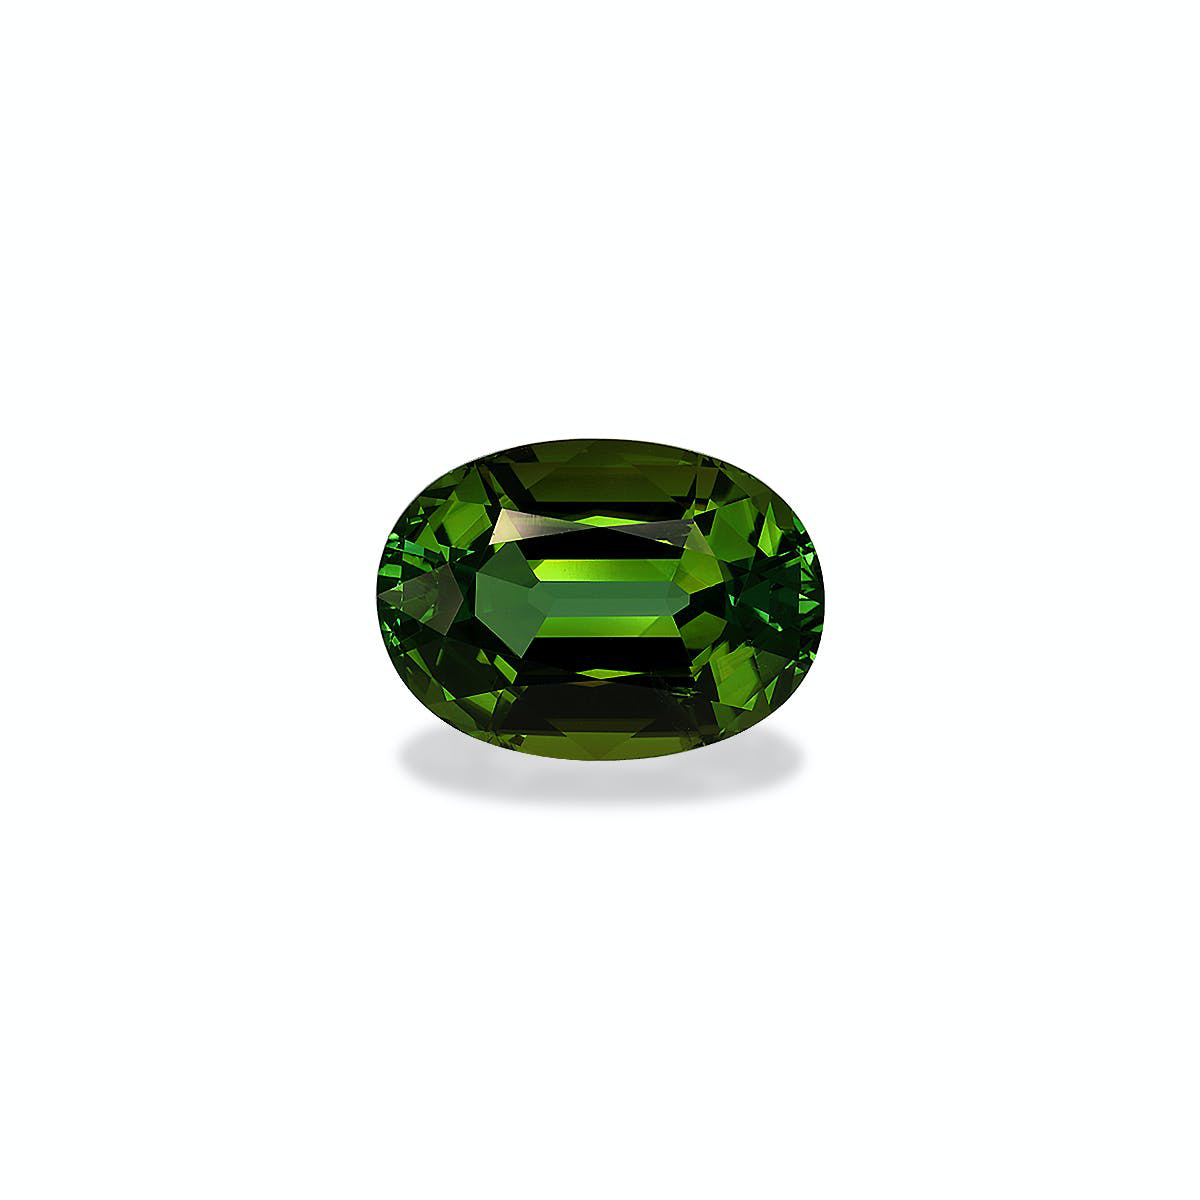 Picture of Forest Green Tourmaline 28.05ct (TG1562)